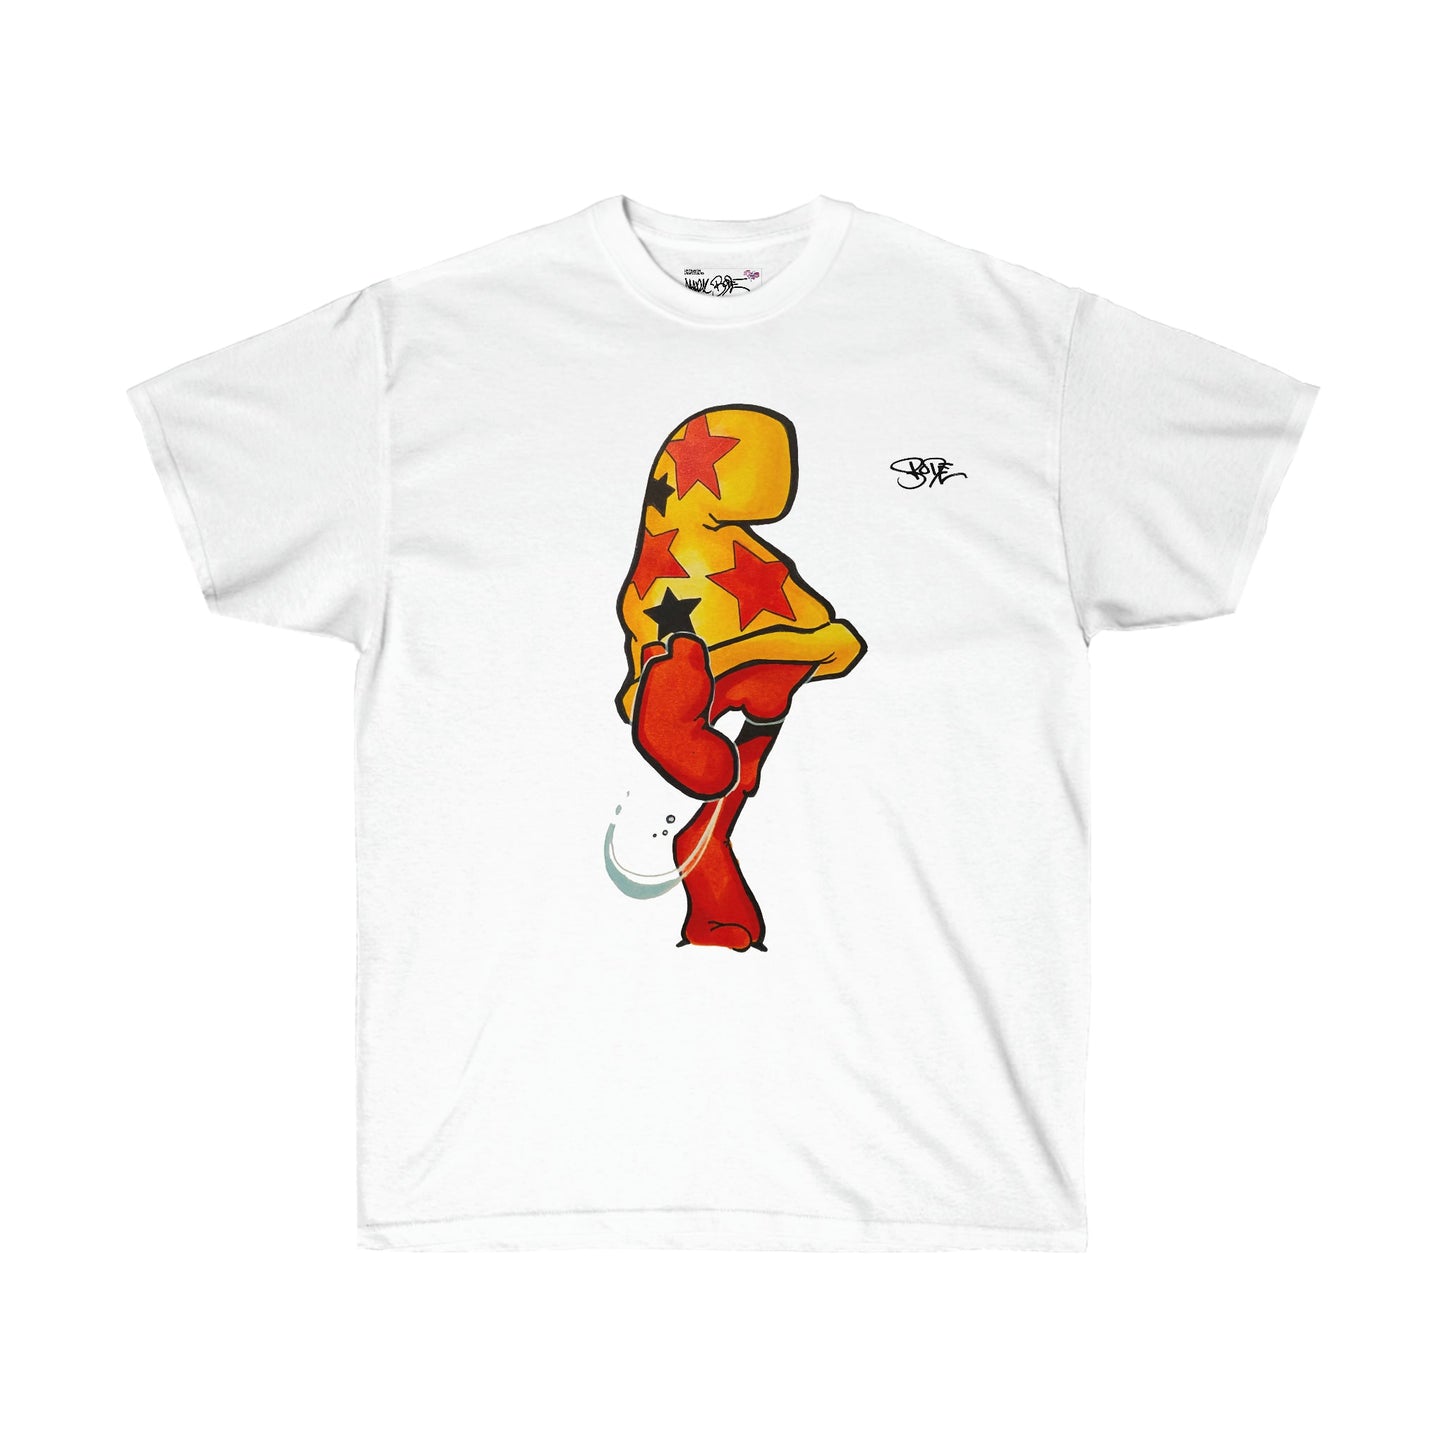 Bode Creed "Classic Cheech Drawing" Limited Edition Tee White